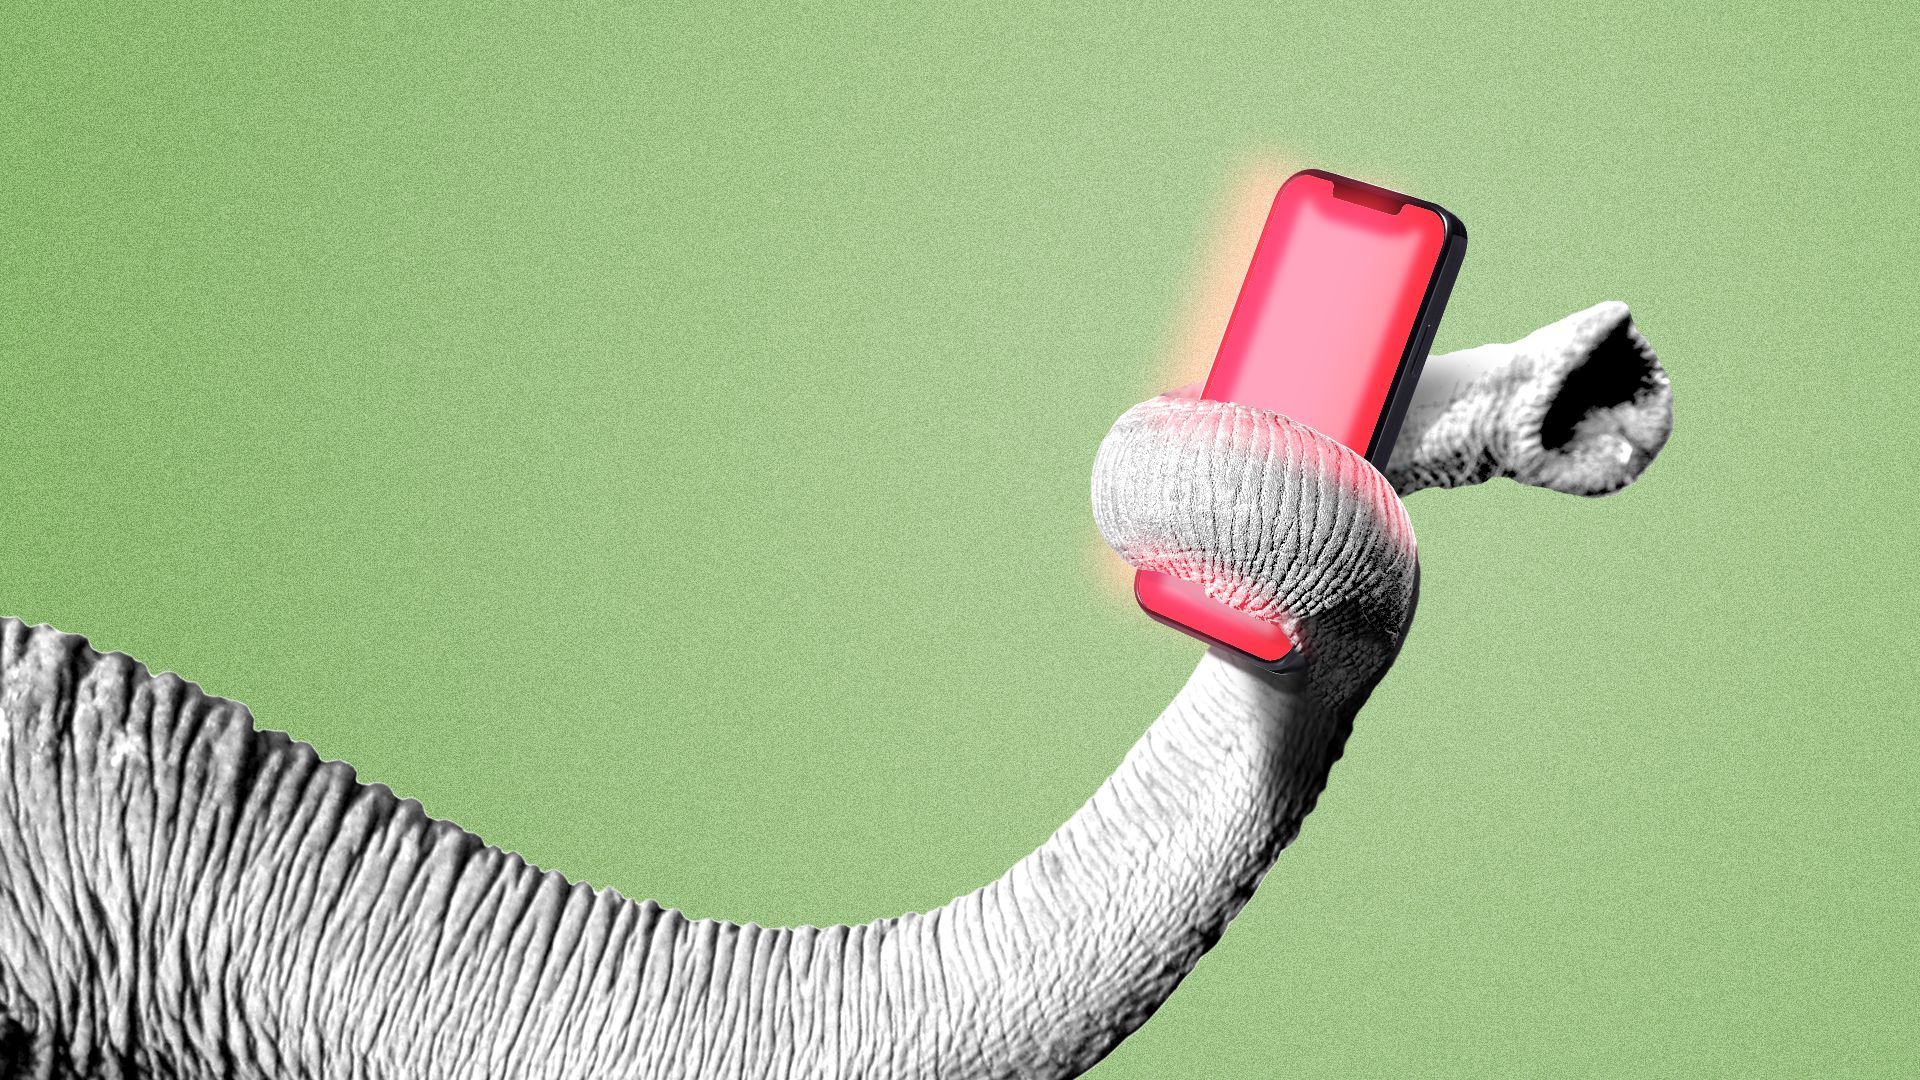 Illustration of an elephant trunk holding a smartphone glowing red.